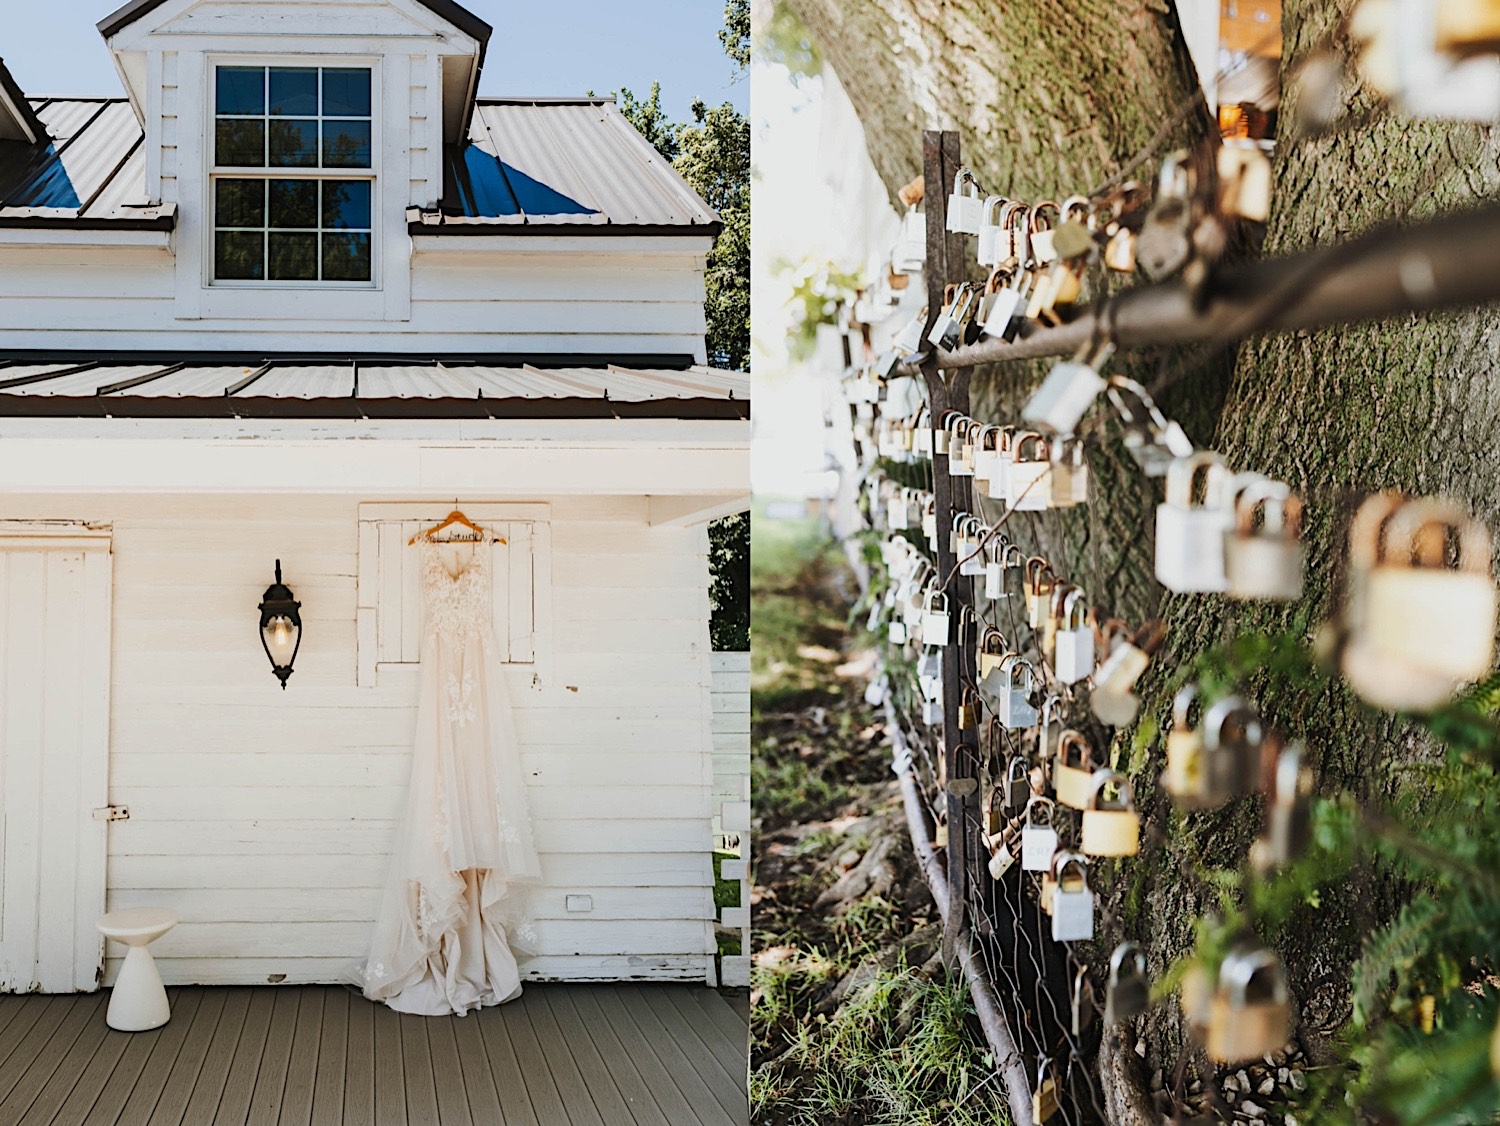 2 photos side by side, the left is of a wedding dress hanging on the front door of a white building, the right is of a wire fence with padlocks dangling on the wires